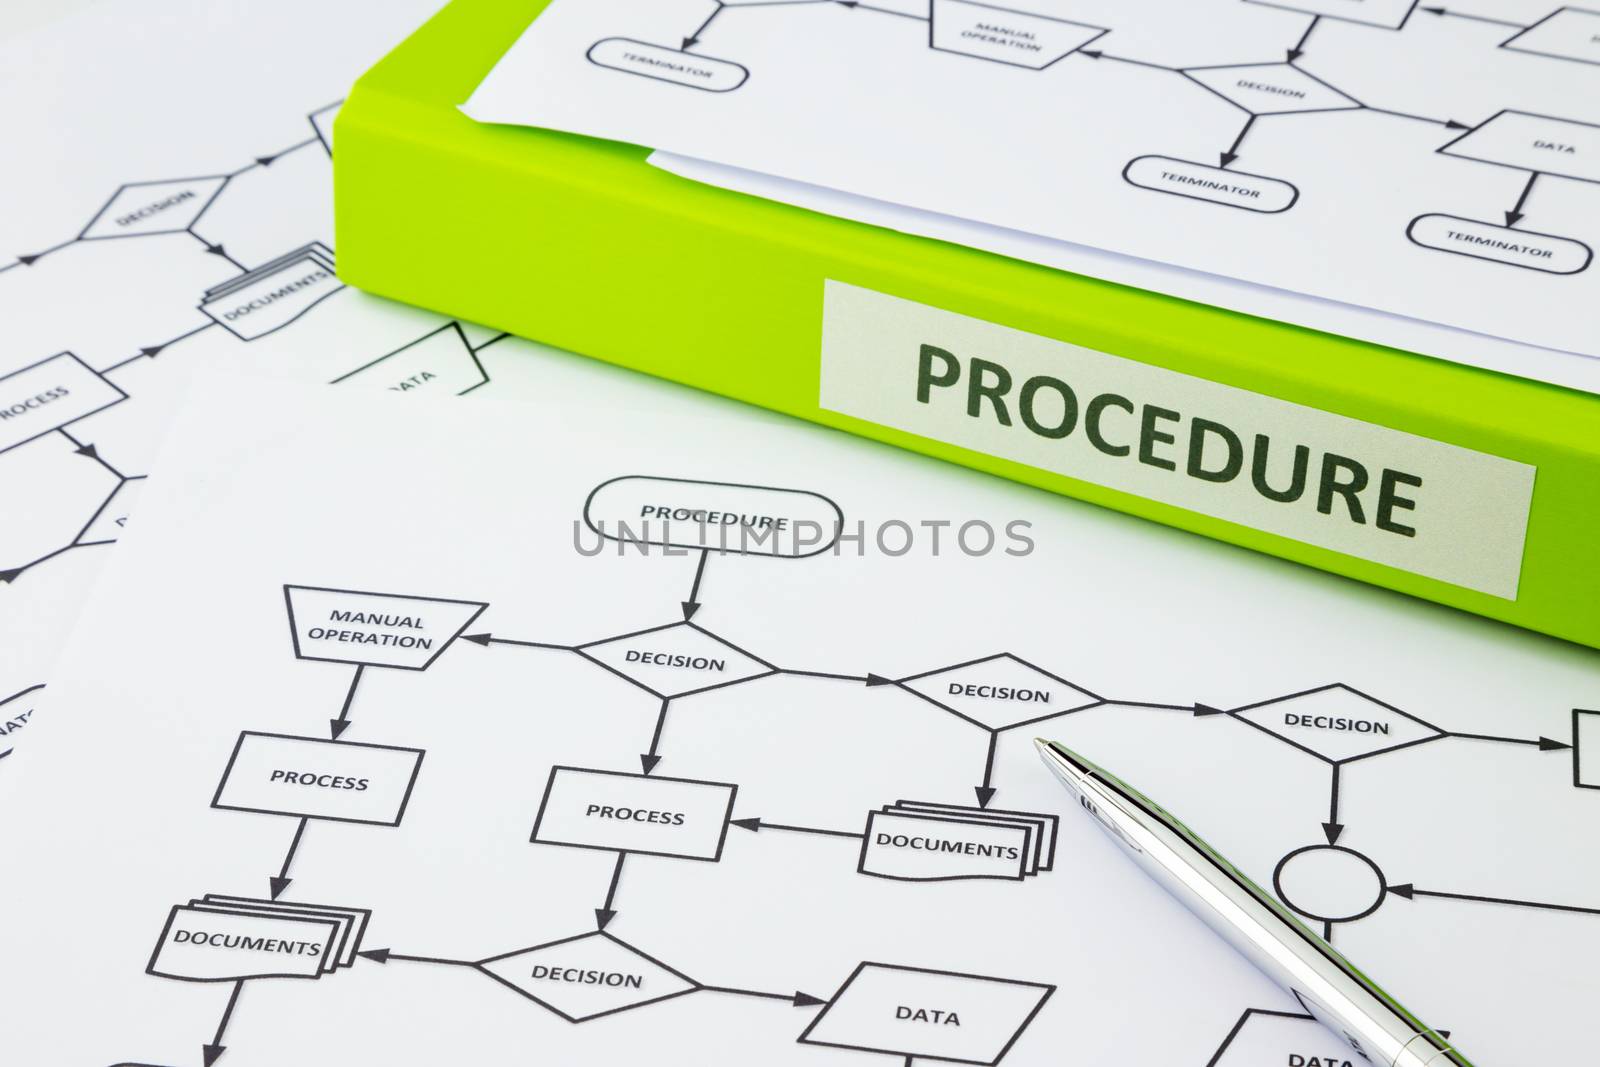 Green binder with PROCEDURE word on label place on process procedure documents, pen pointing at decision word in flow chart